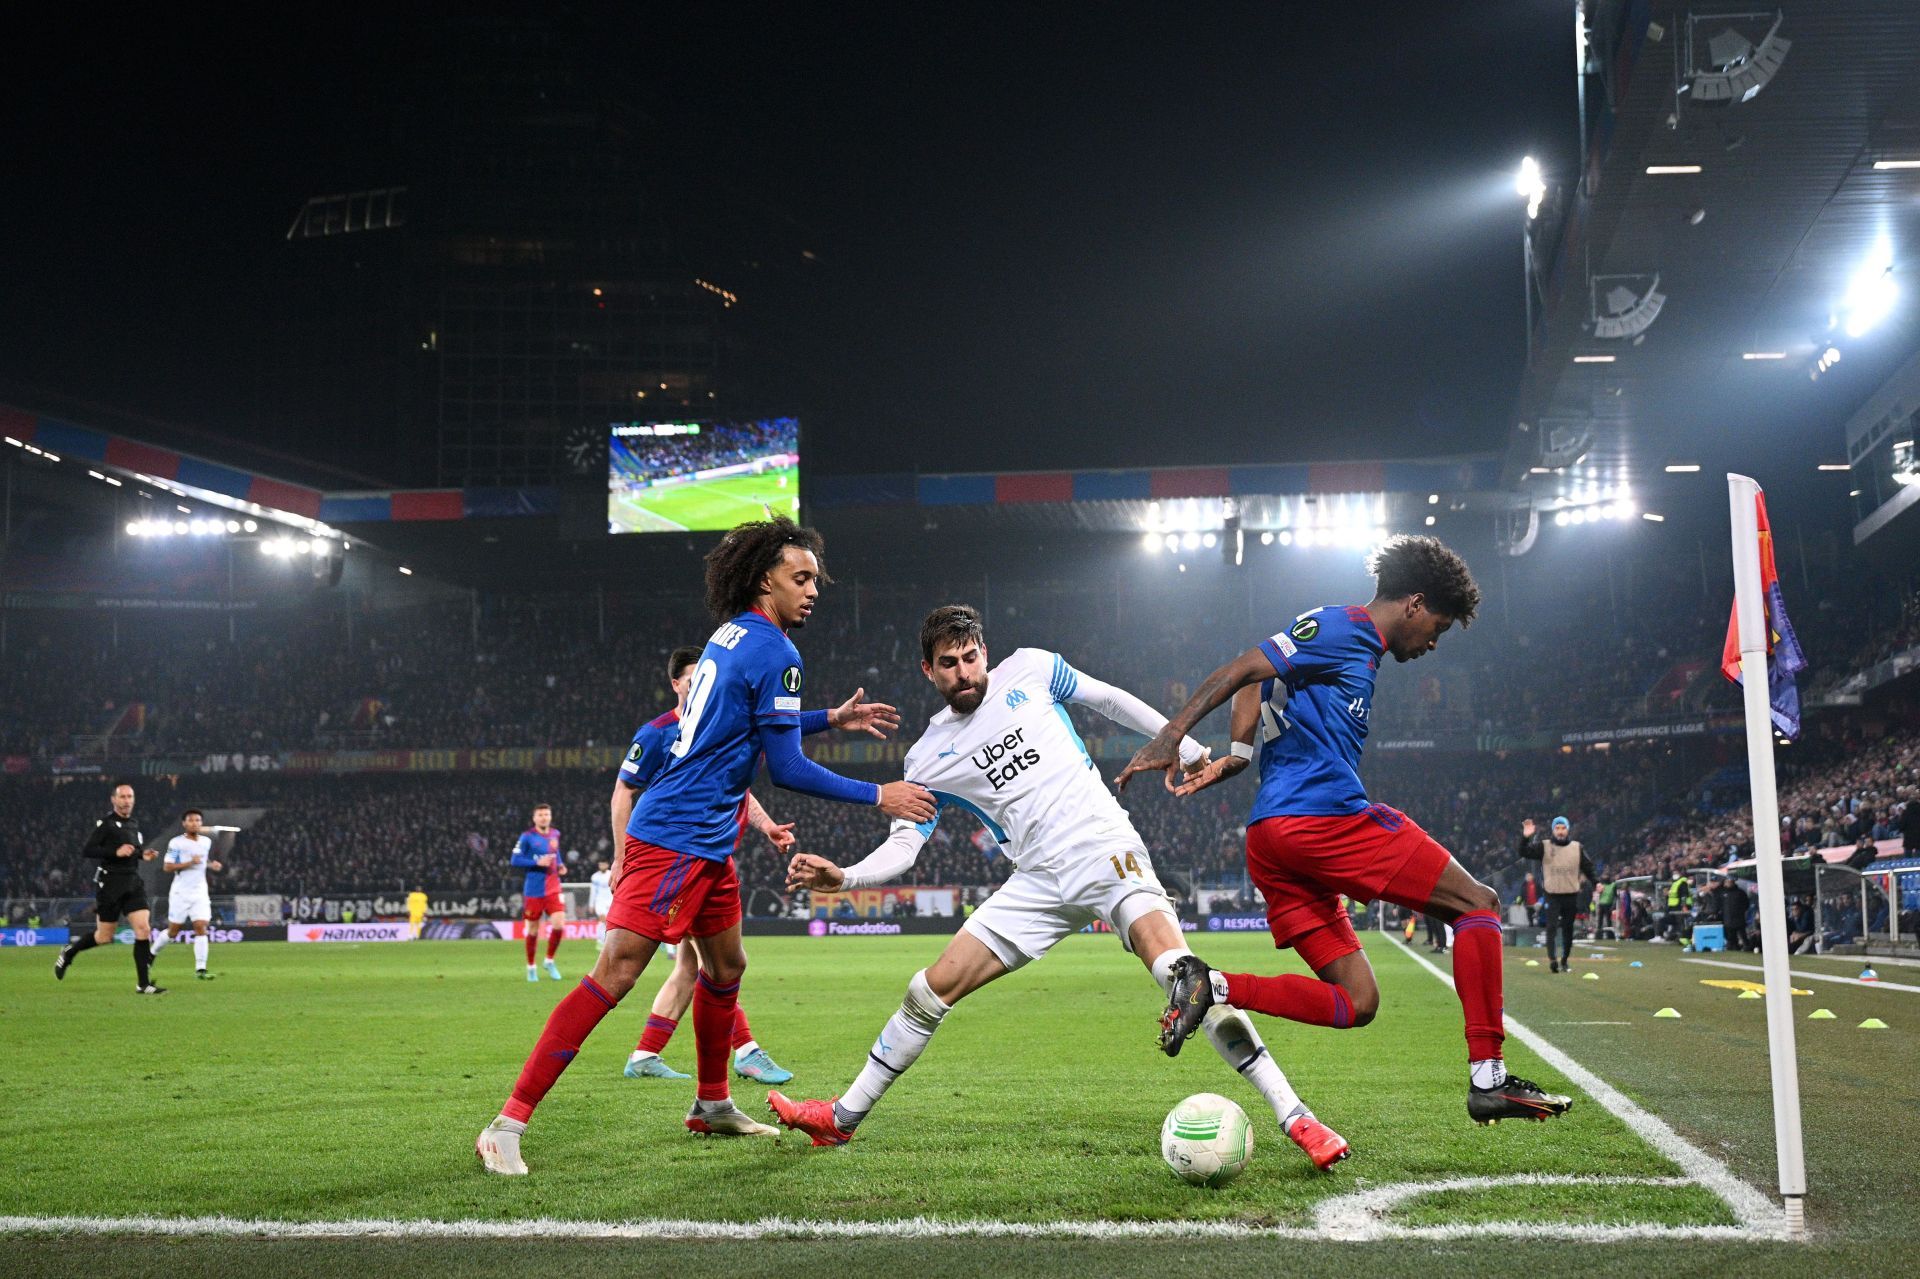 FC Basel will look to get their first win of the season in the Swiss Super League.